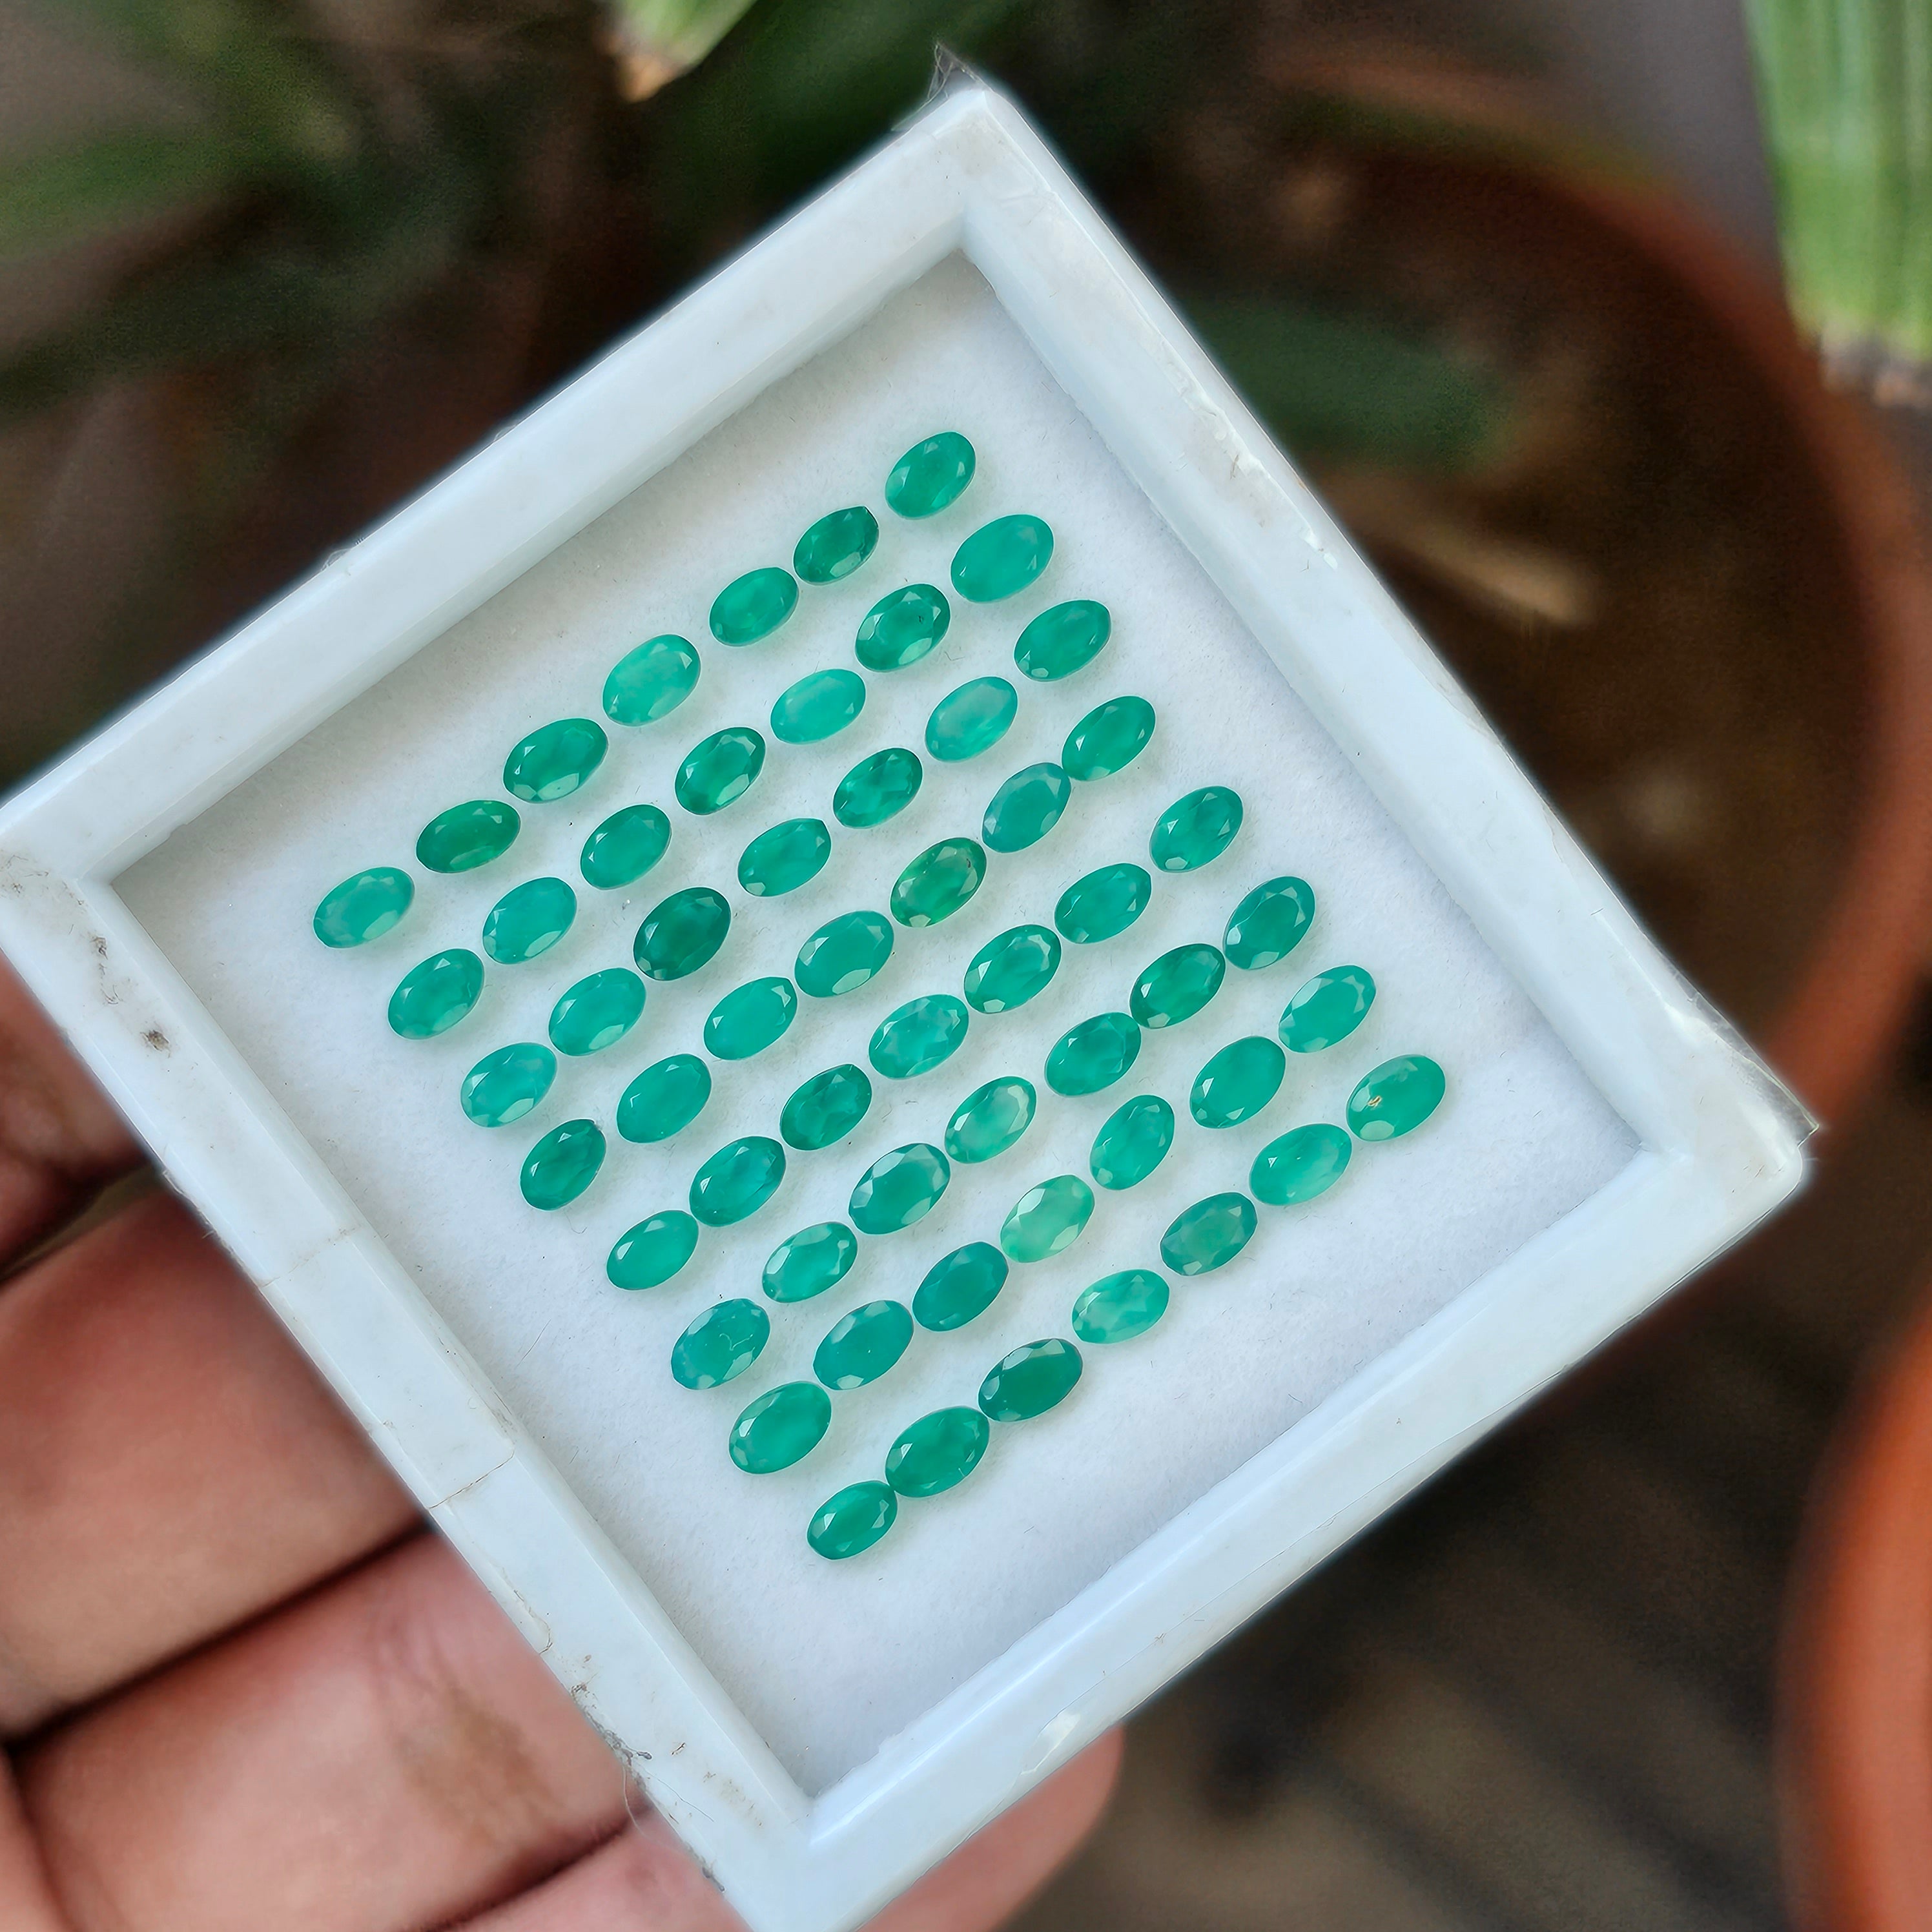 56 Pcs Natural Green Onyx Faceted Gemstone Shape: Oval| Size: 5x3mm - The LabradoriteKing